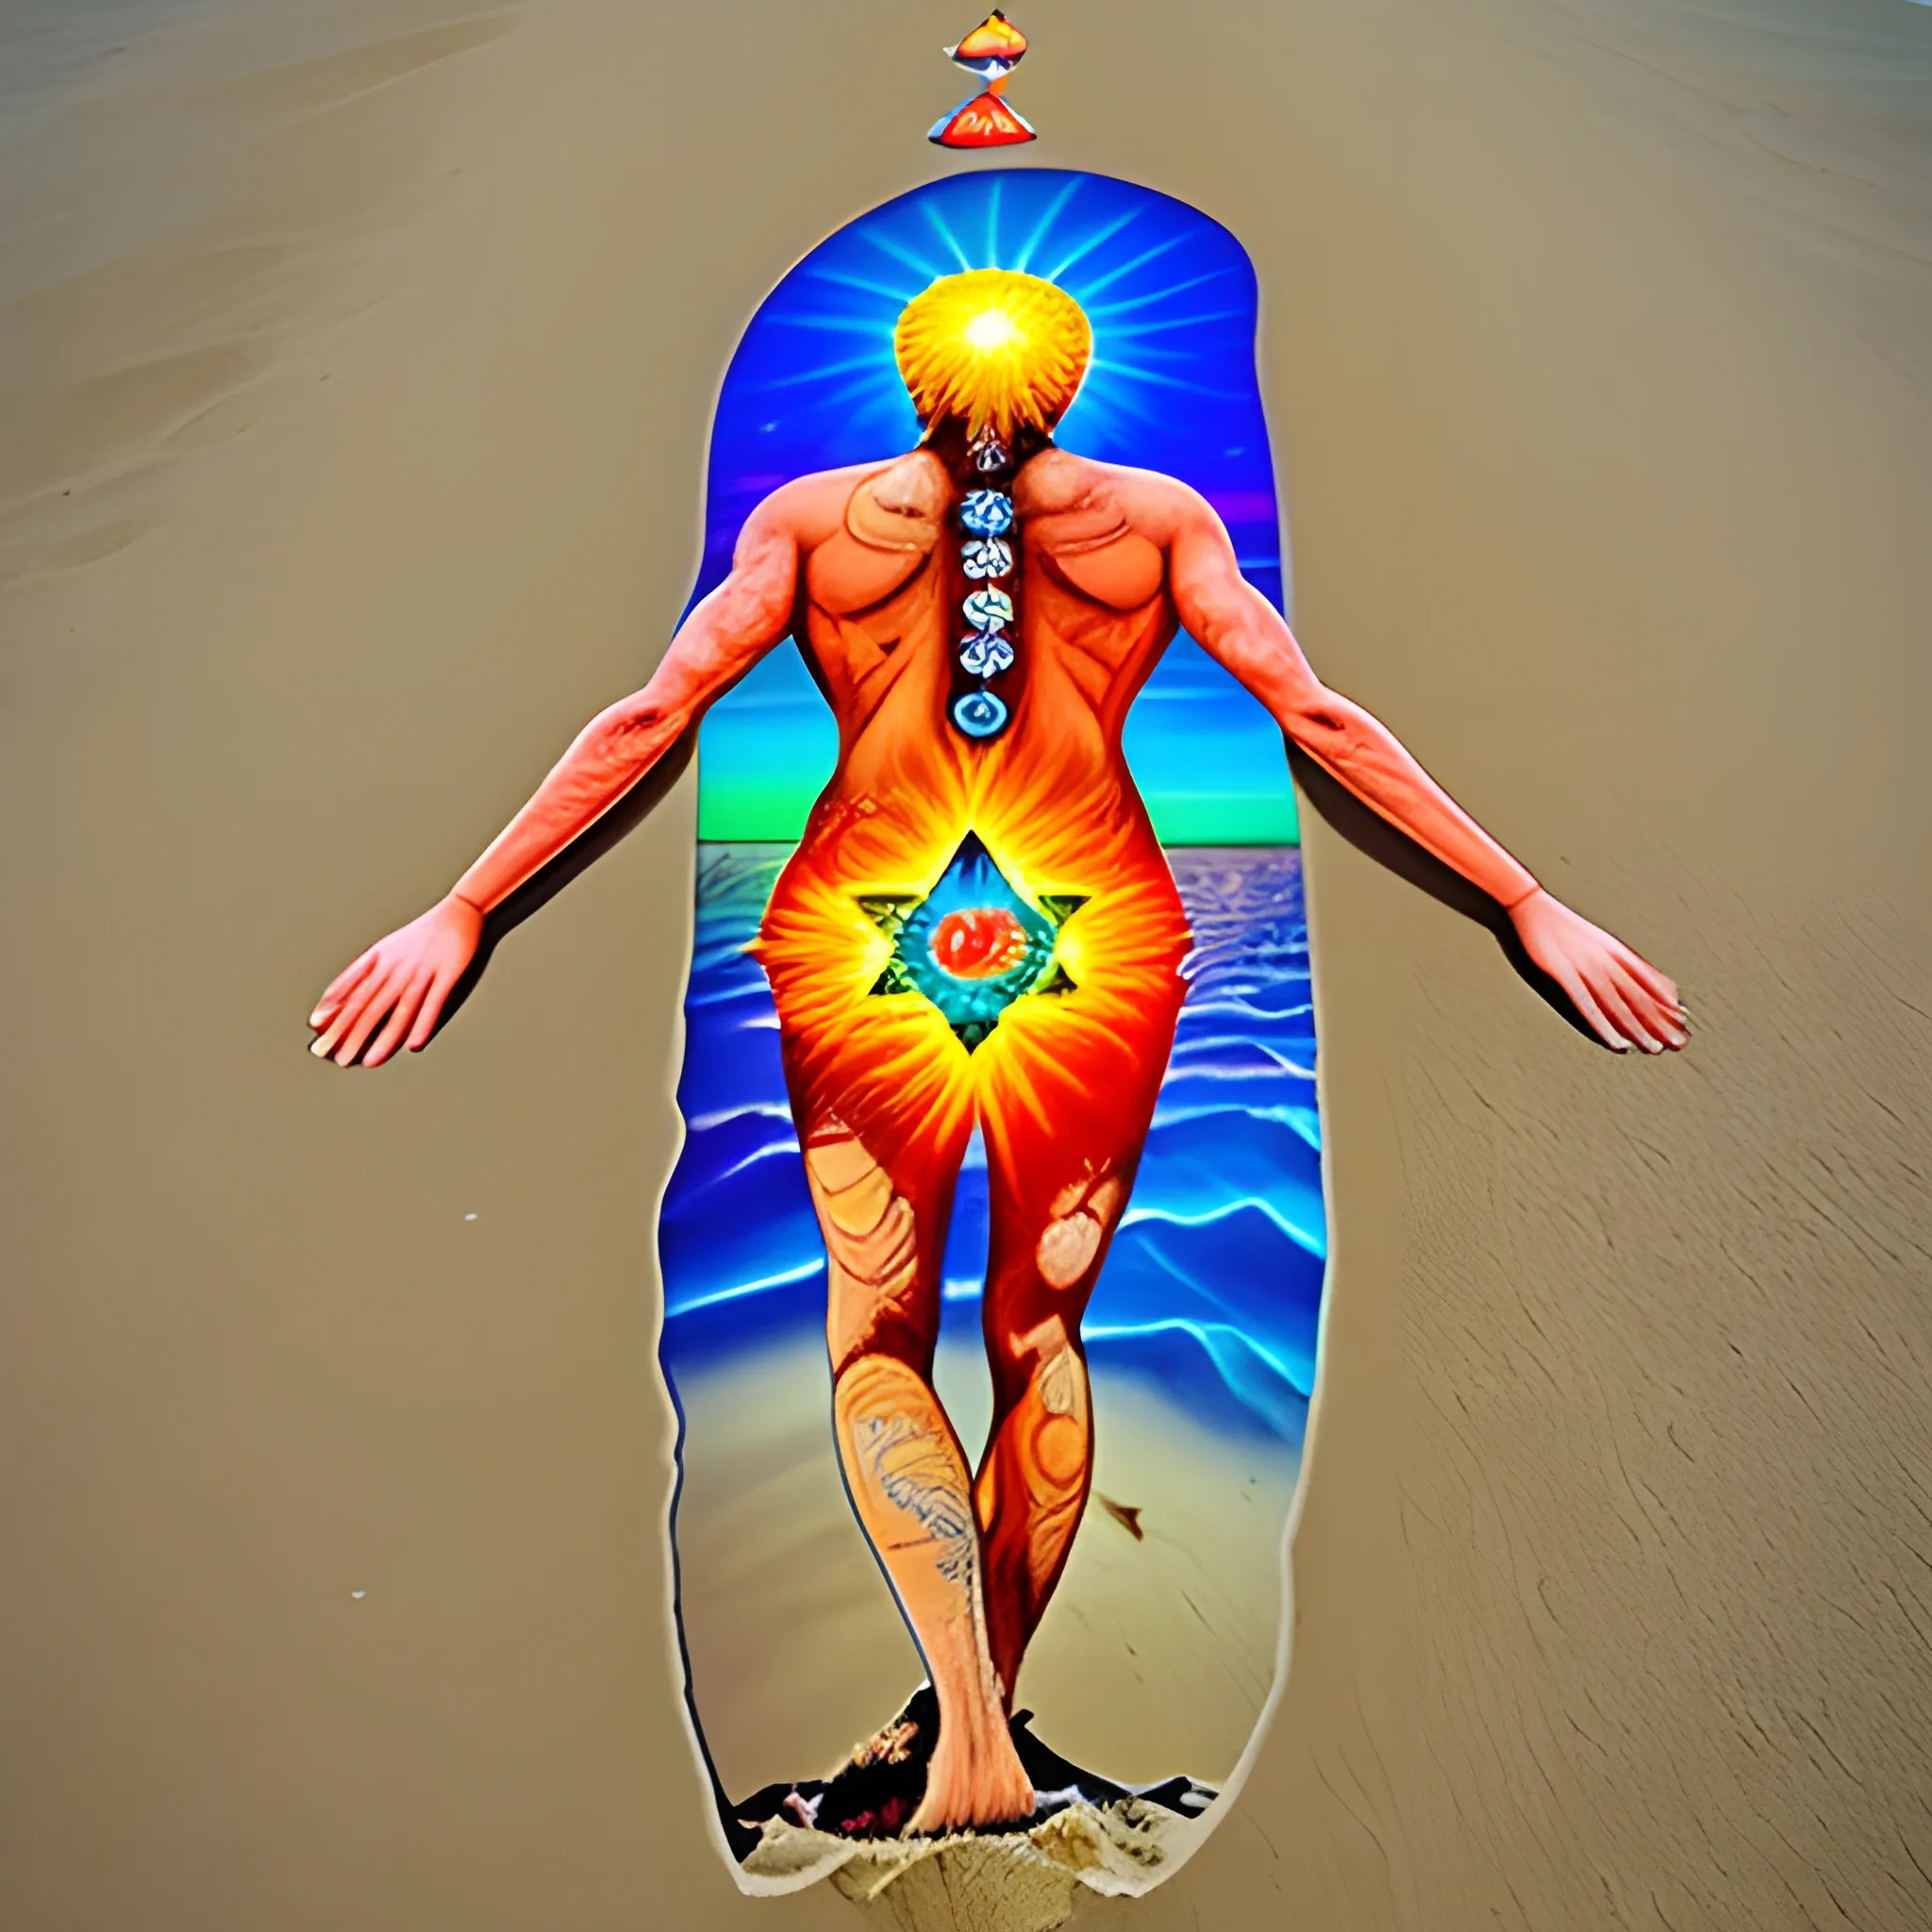 
man with the seven chakras on his back, beach, sunset, universe, walking to the sea, initiation, footprints in the sand, Cartoon, Trippy